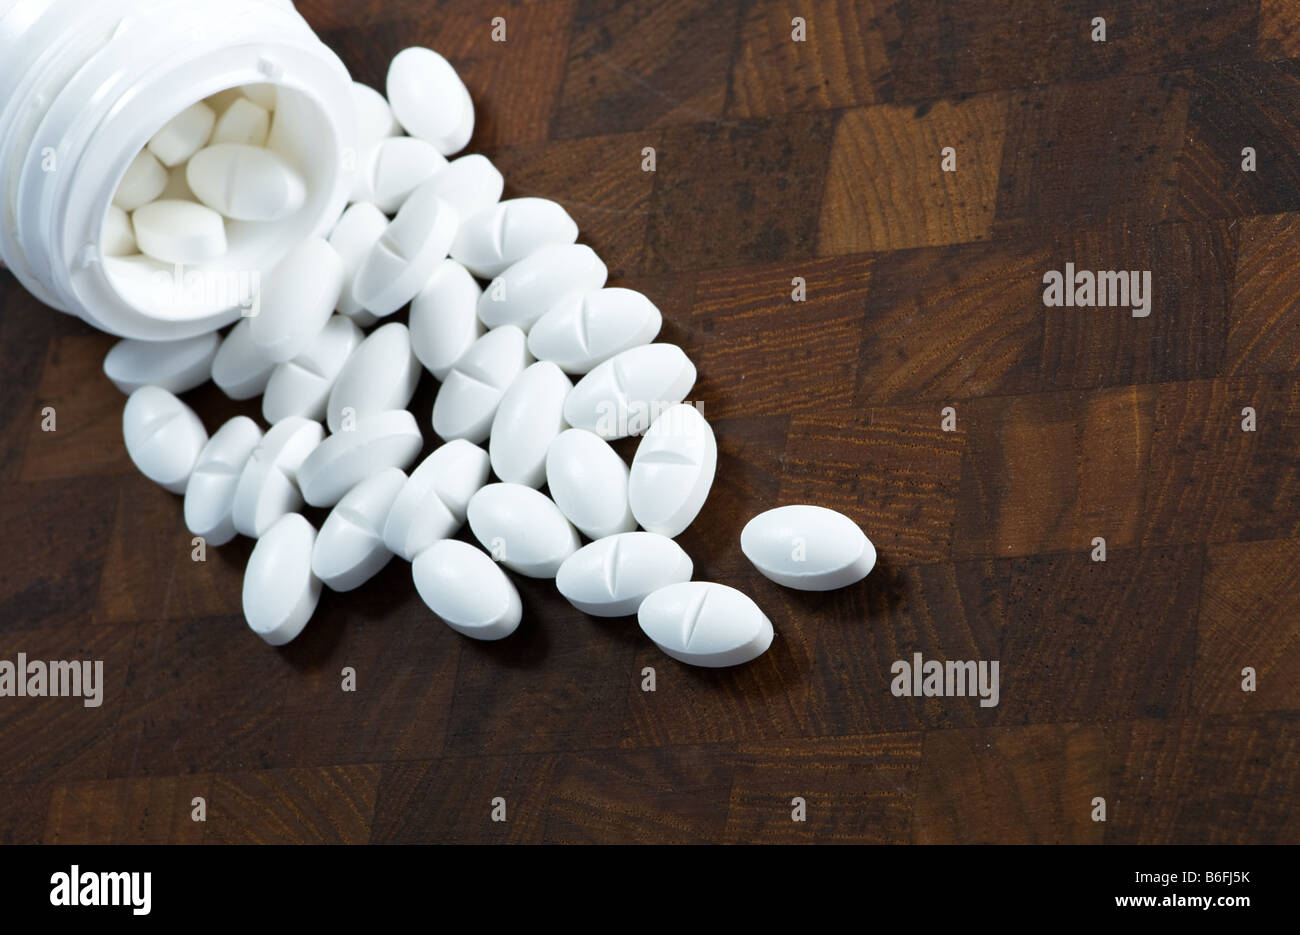 Pills from a glass shown on wood Stock Photo